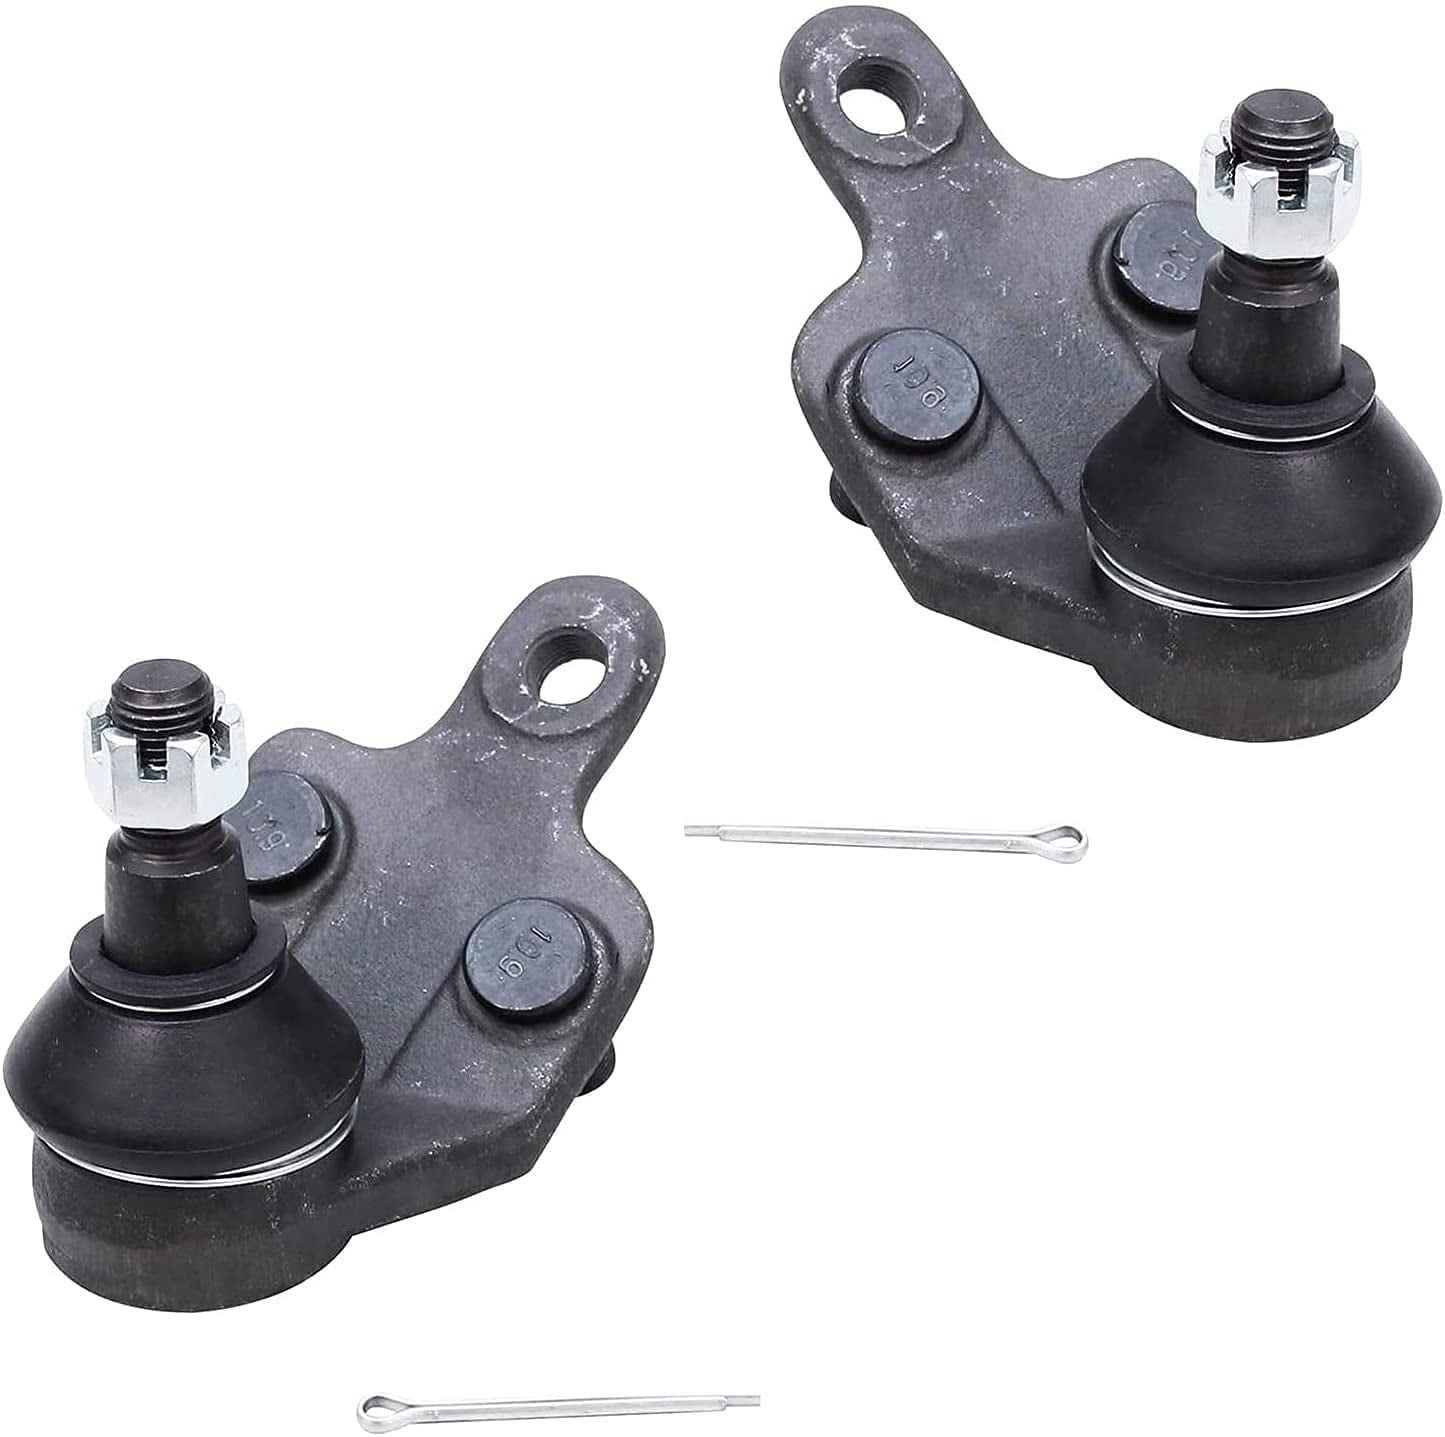 Detroit Axle Pair (2) Front Lower Control Arms  Ball Joints for 199 